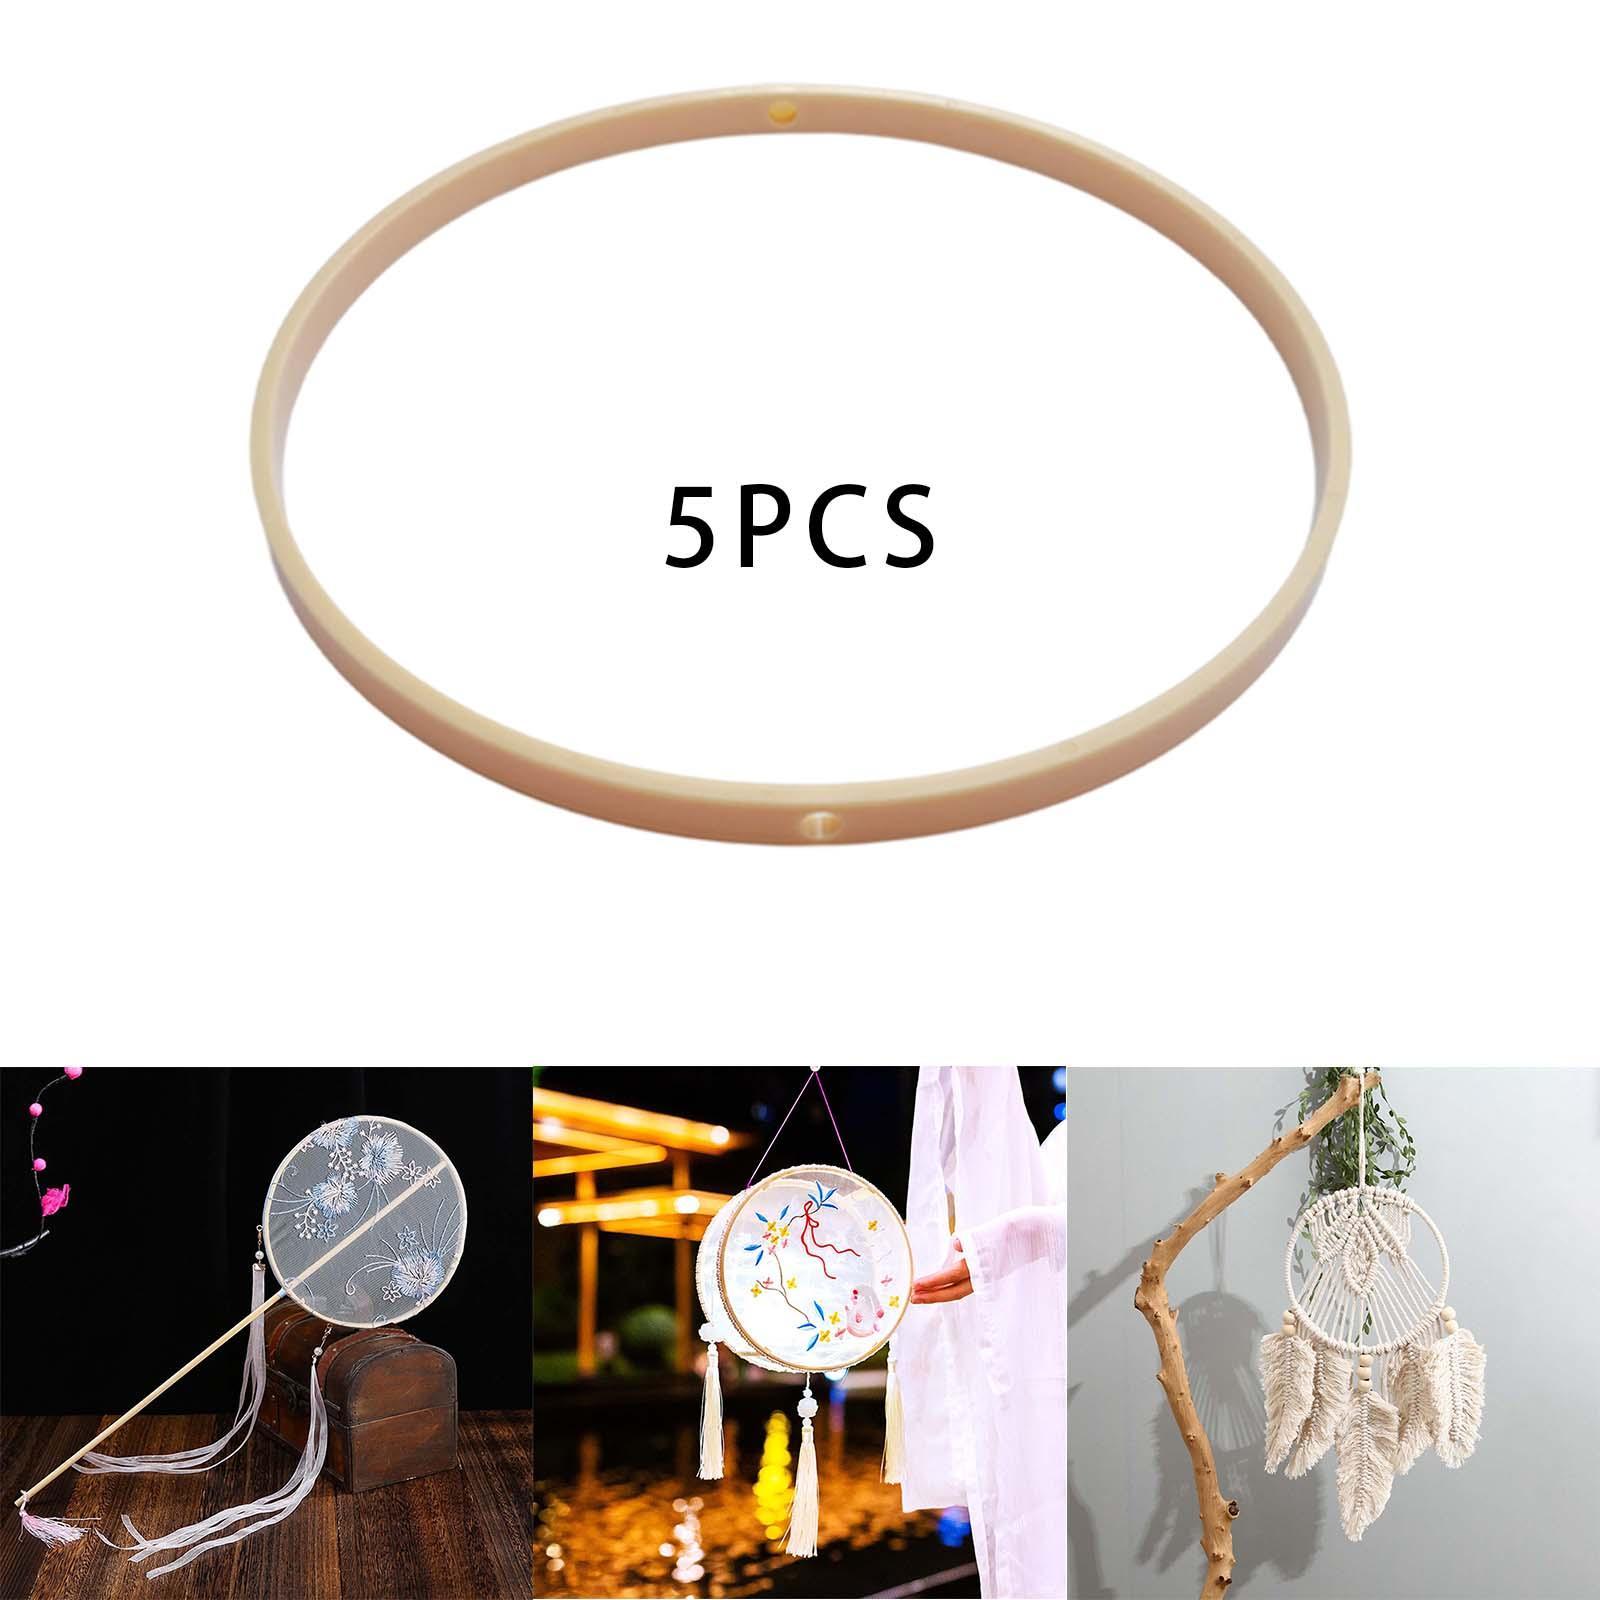 5Pcs DIY Hand Fan Frame Gift Dreamcatcher Hoop for Holiday Birthday Cosplay